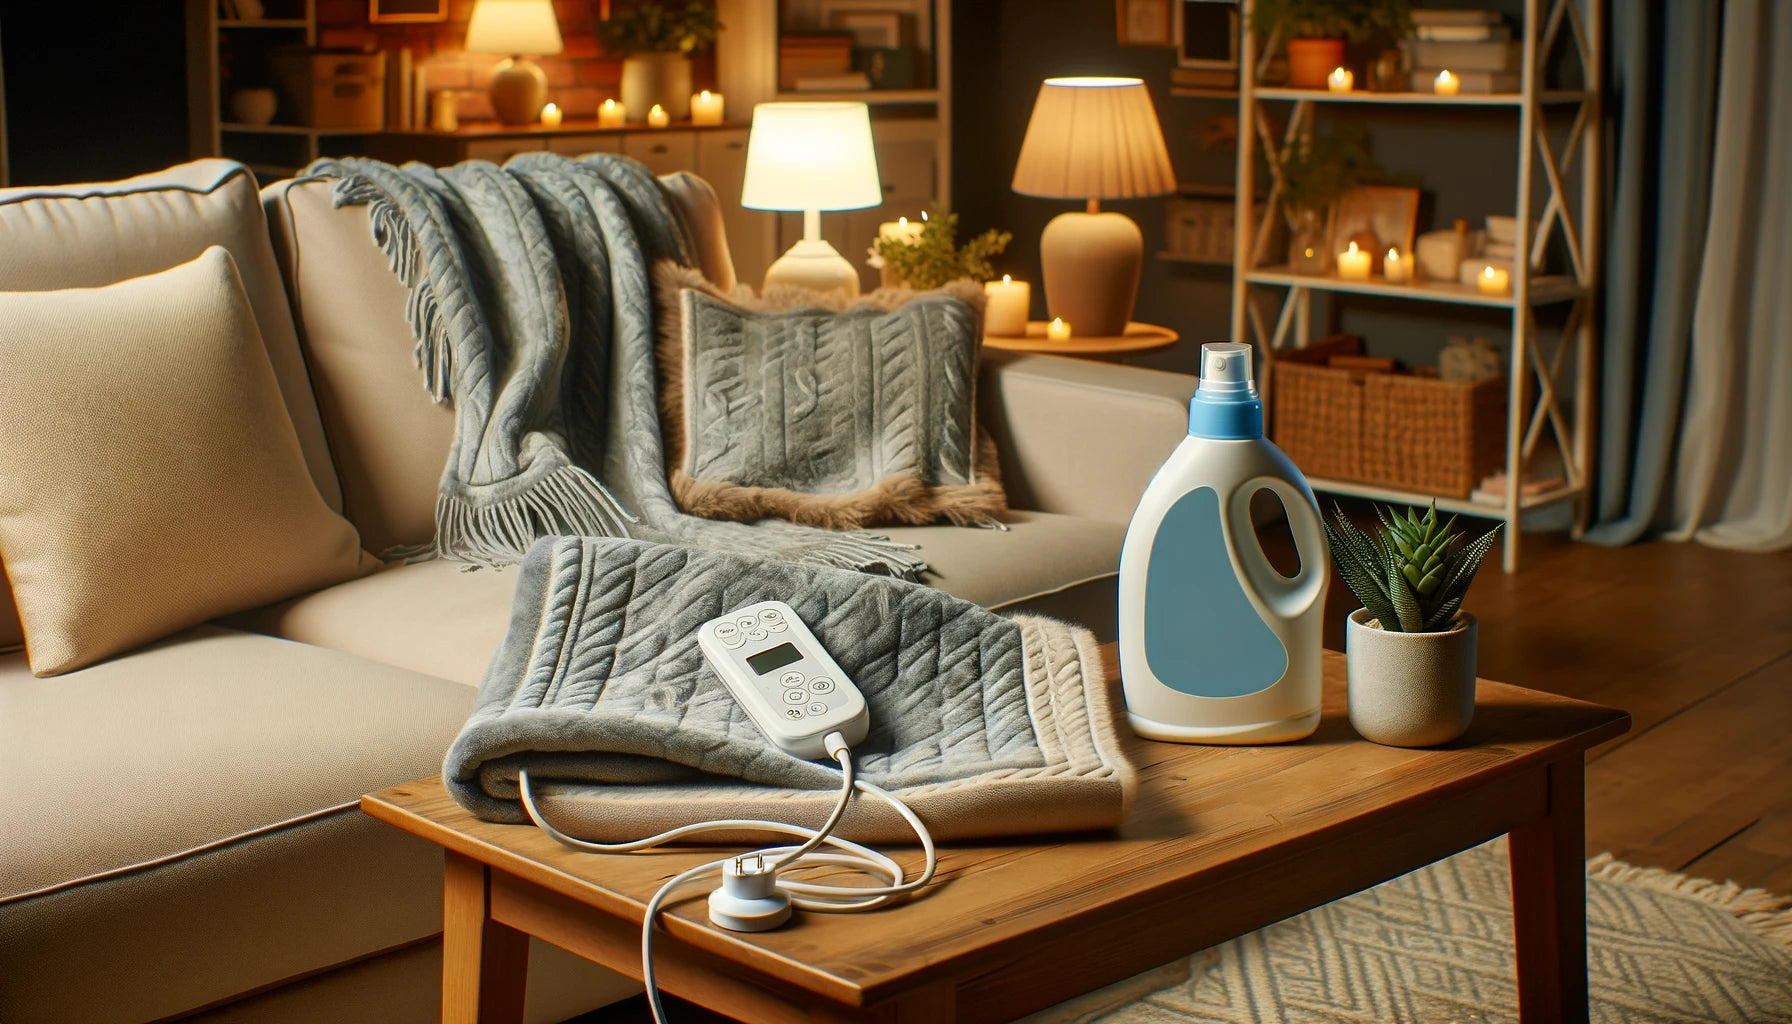 How to Clean an Electric Blanket: Ensuring Safety and Longevity